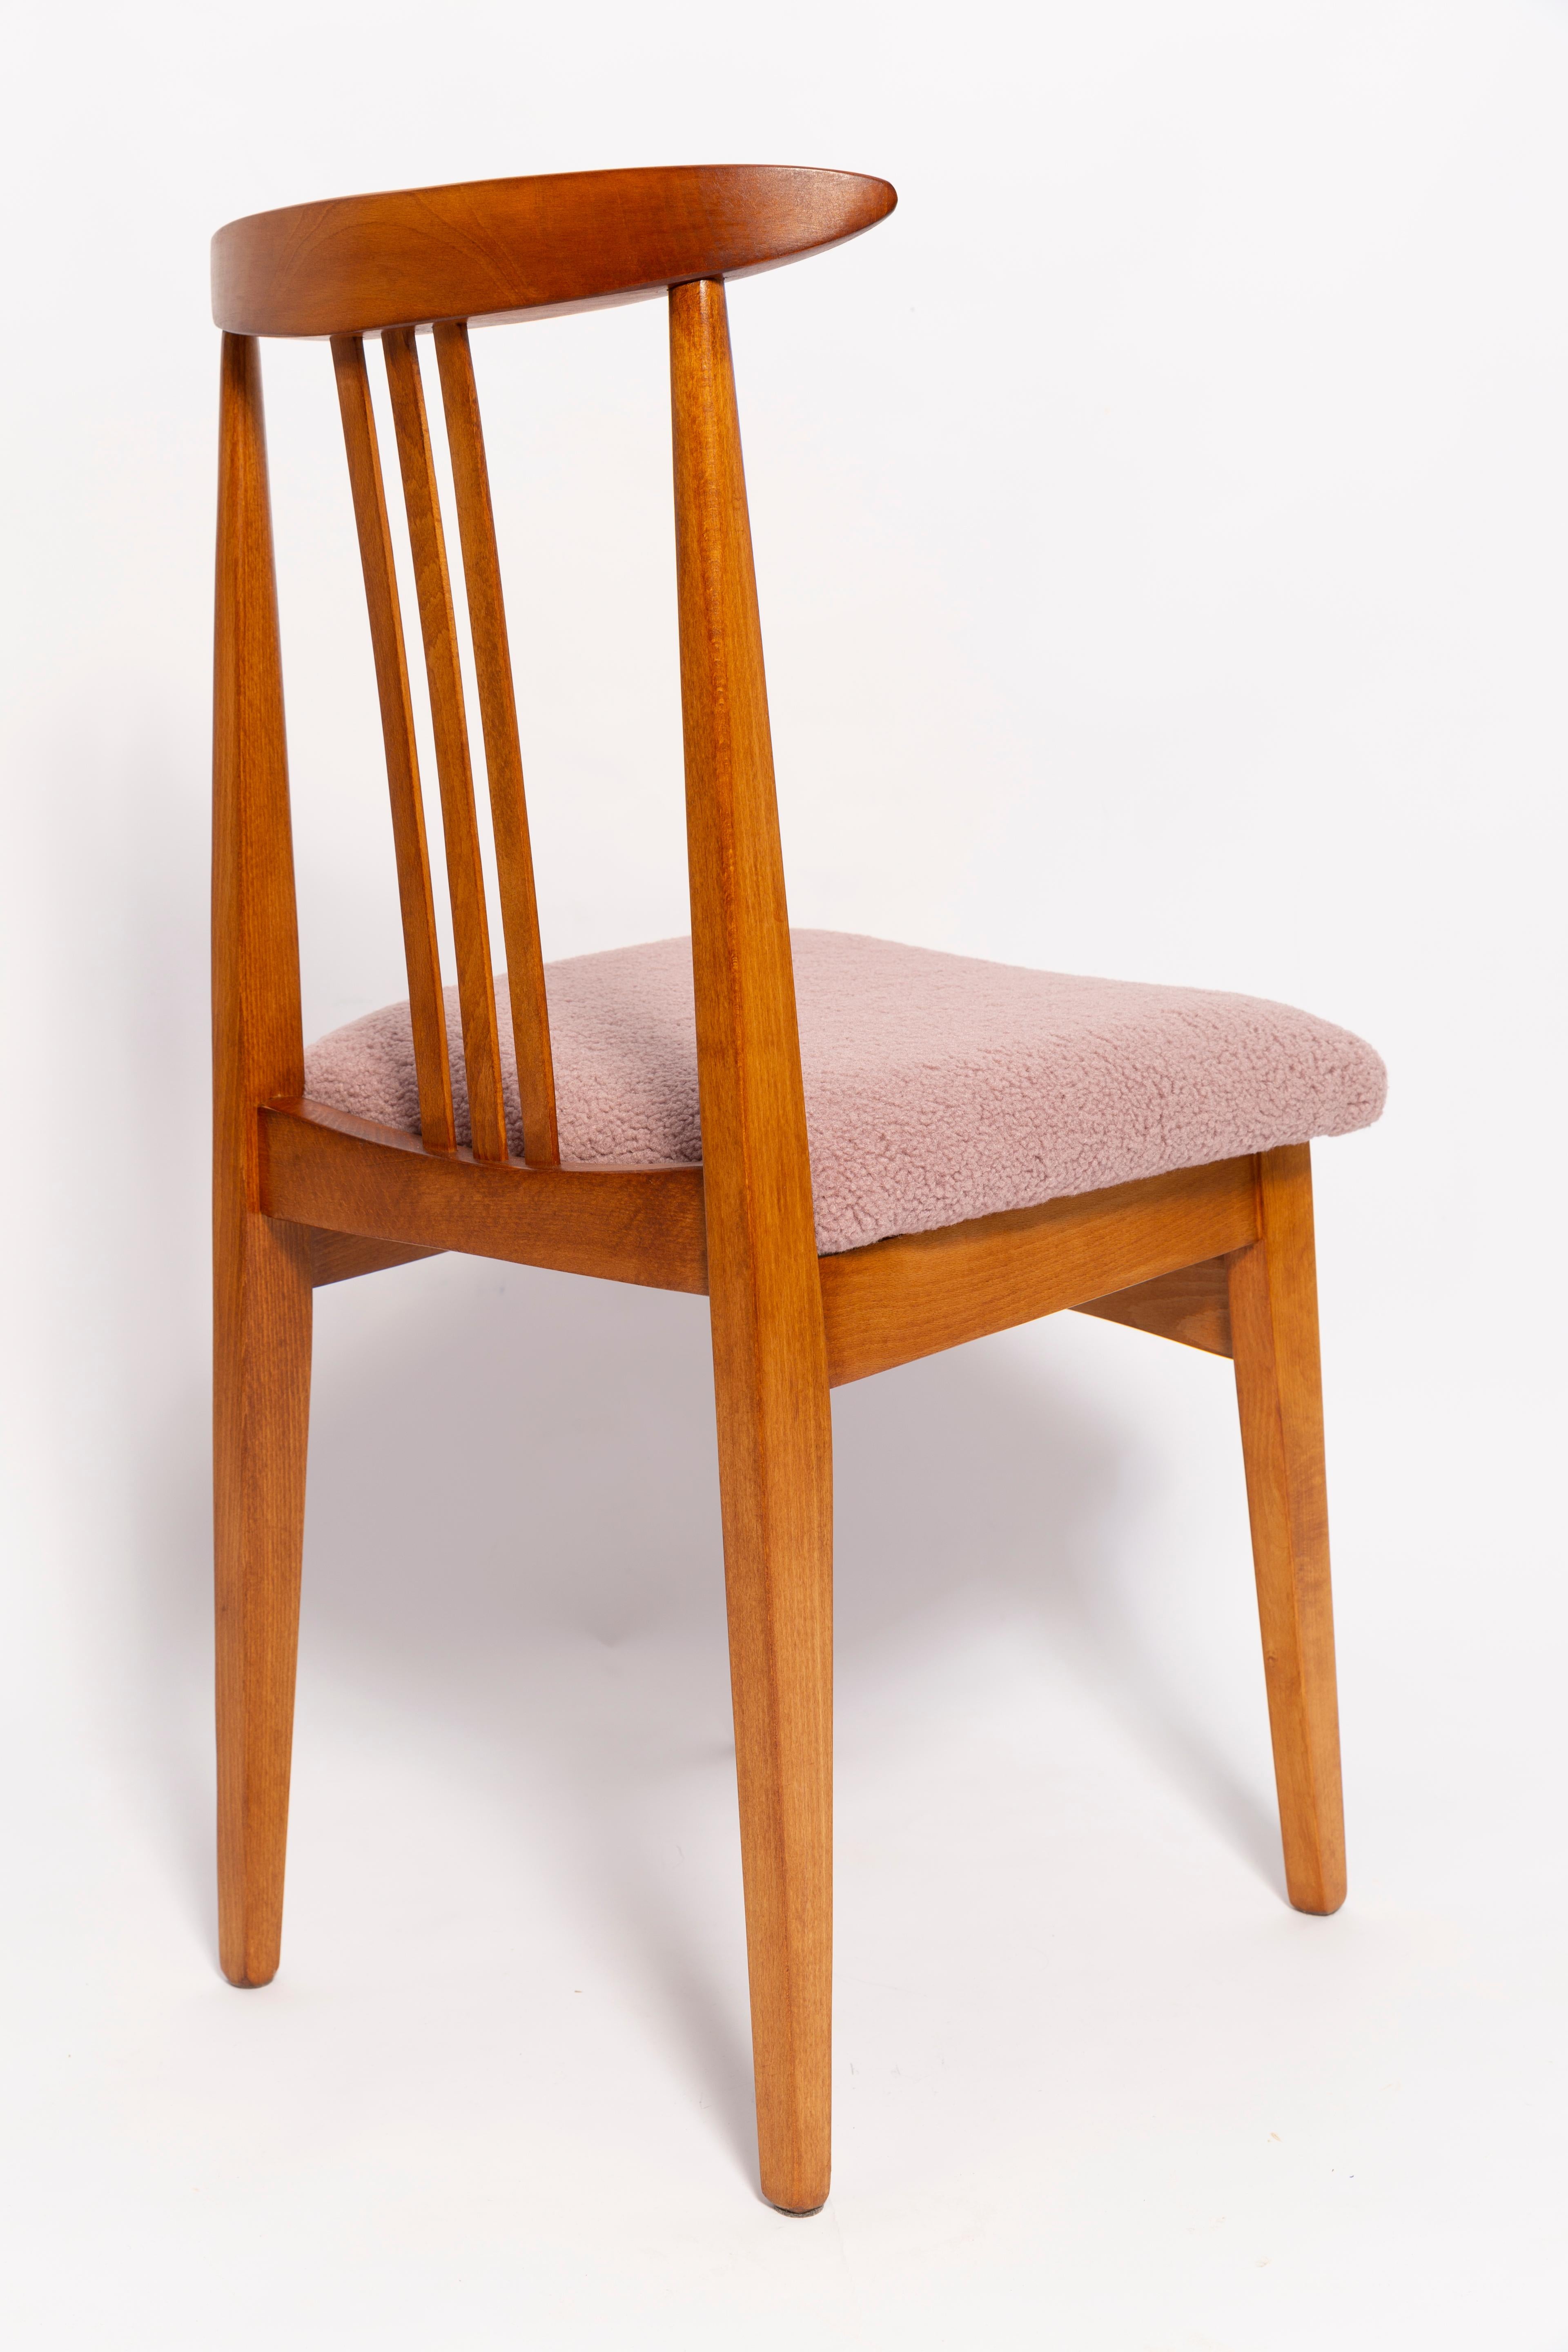 Hand-Crafted Mid-Century Pink Blush Boucle Chair, by M. Zielinski, Europe, 1960s For Sale